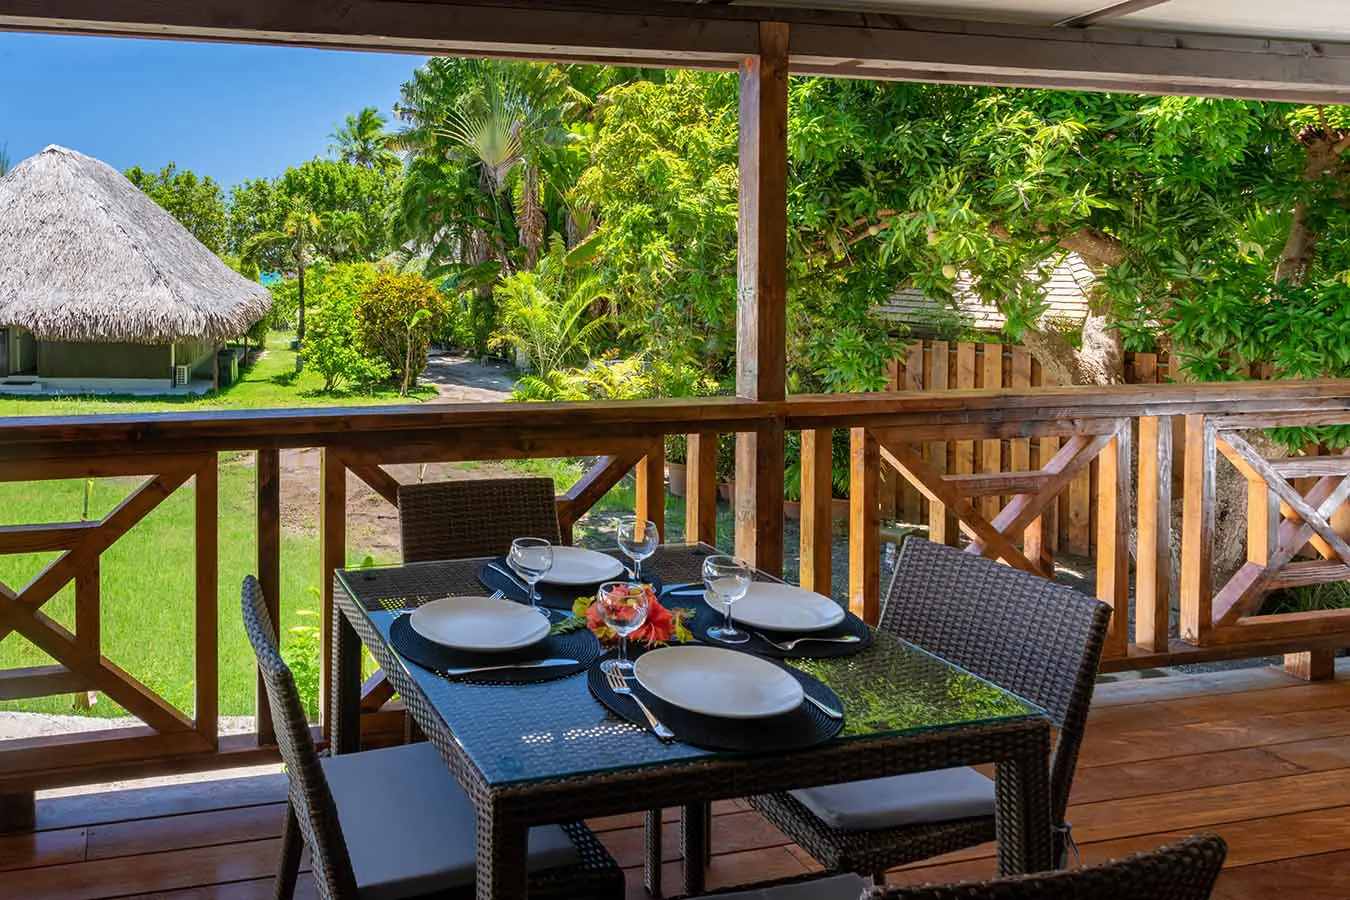 Dining table on terrace in our vacation home in Bora Bora